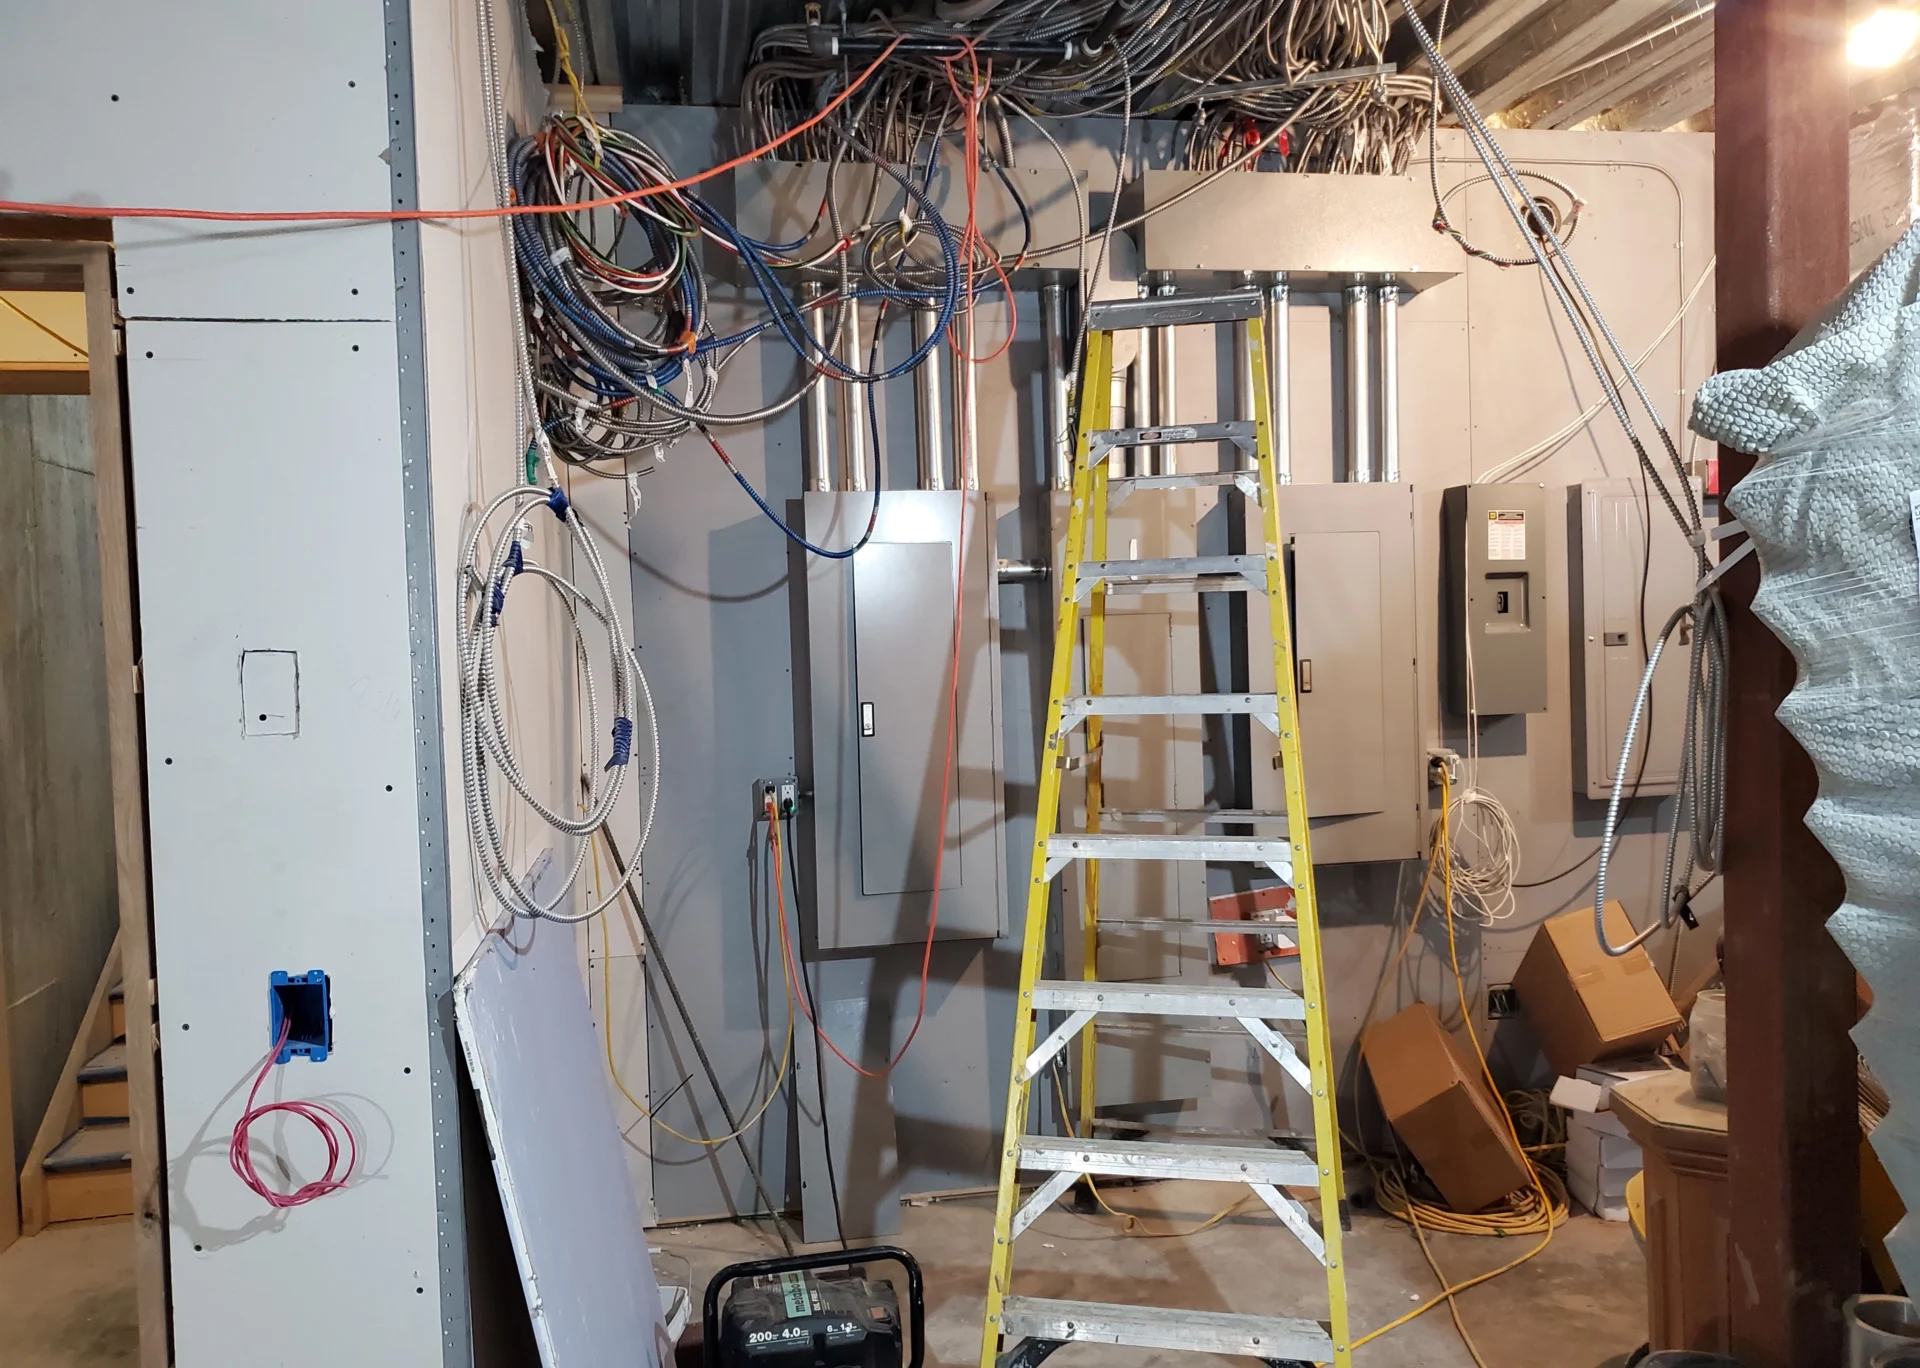 A ladder in the middle of an electrical room.